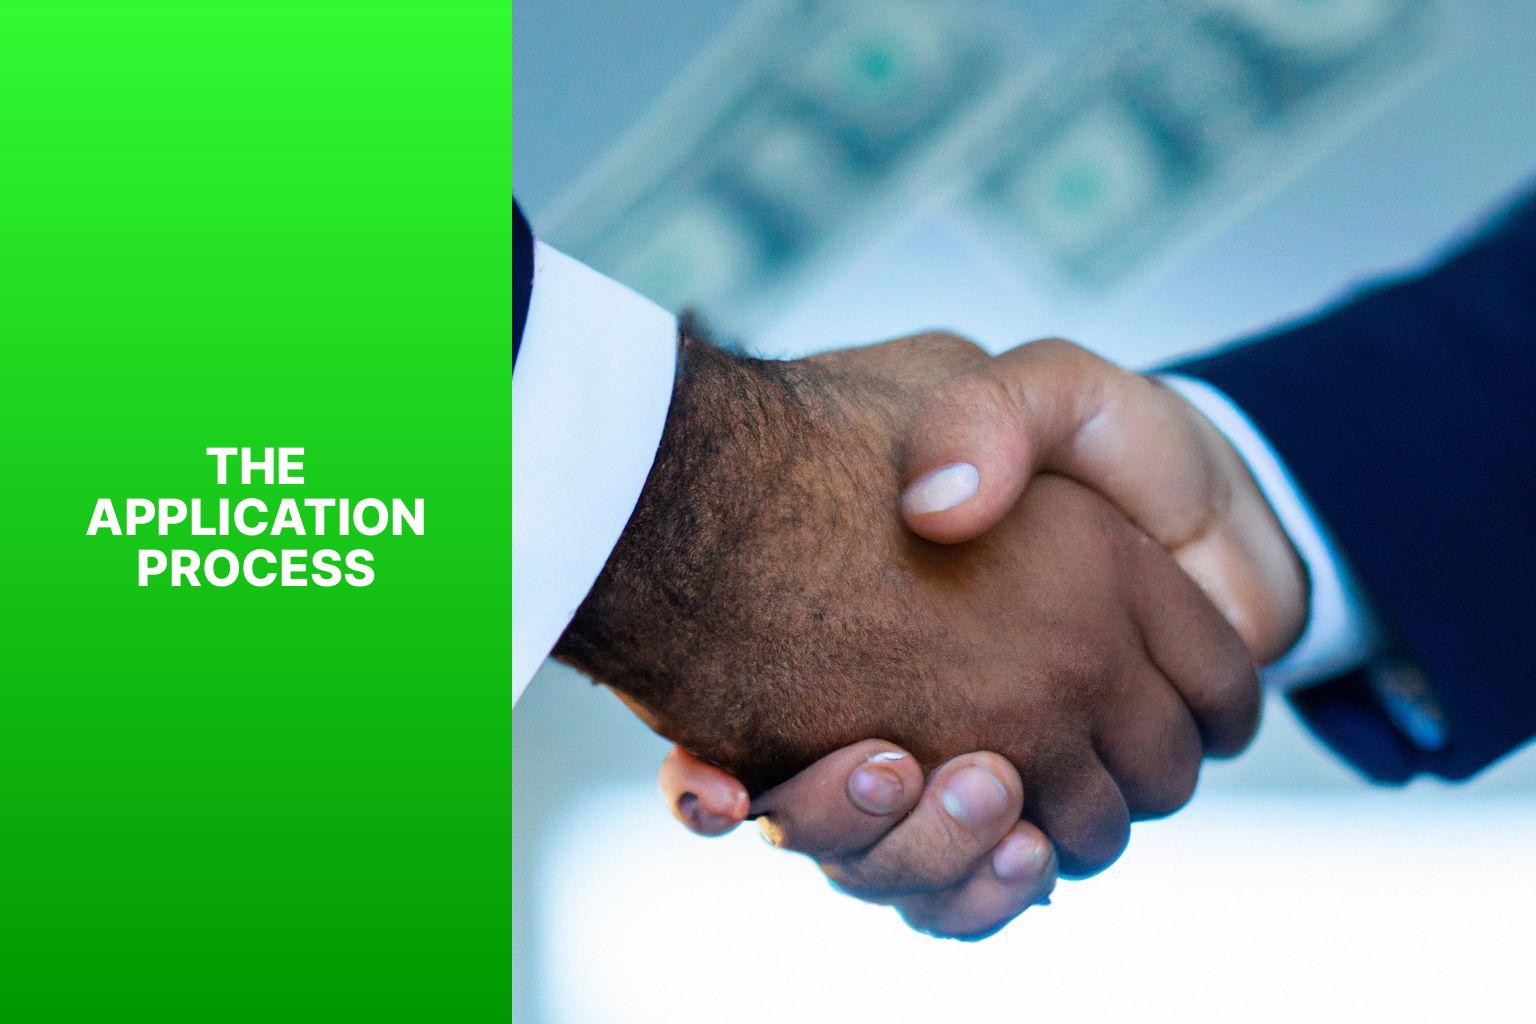 The Application Process - The Green Light: How to Get a Business Loan with Good Credit 